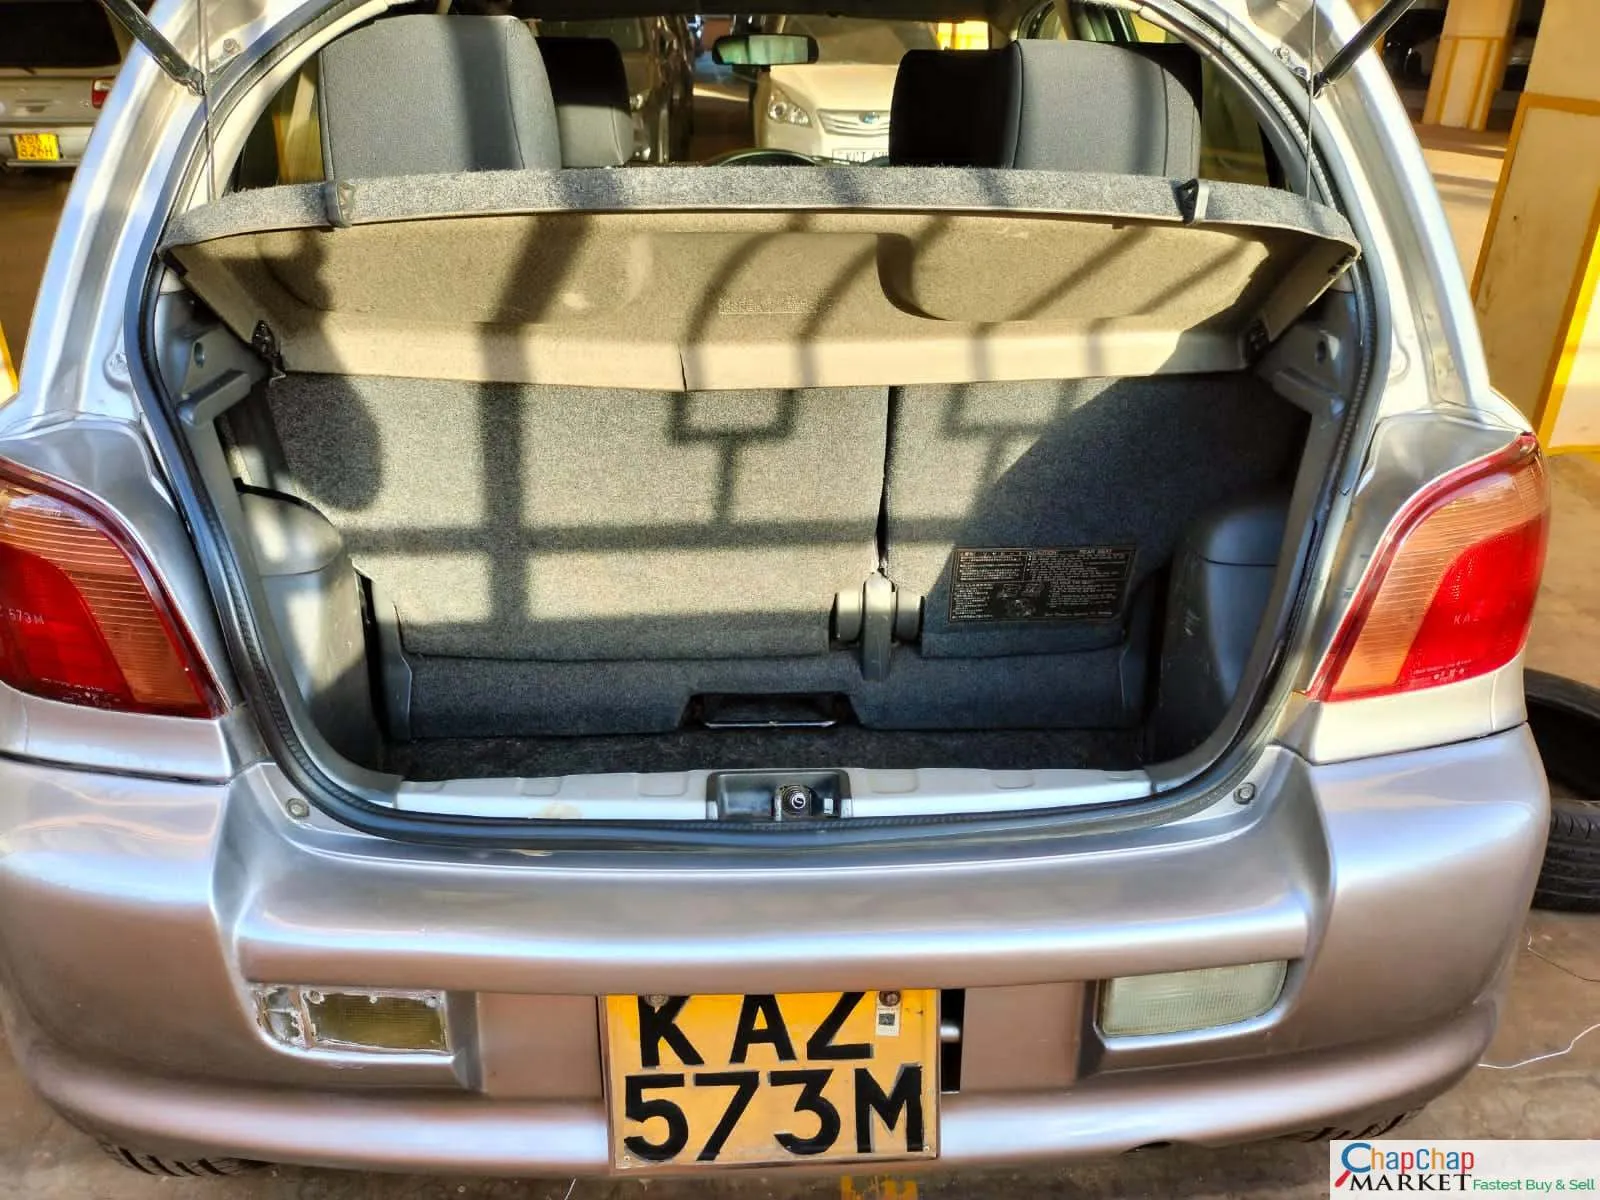 Toyota Vitz RS 1500cc Manual You PAY 30% Deposit INSTALLMENTS Trade in Ok New hire purchase installments